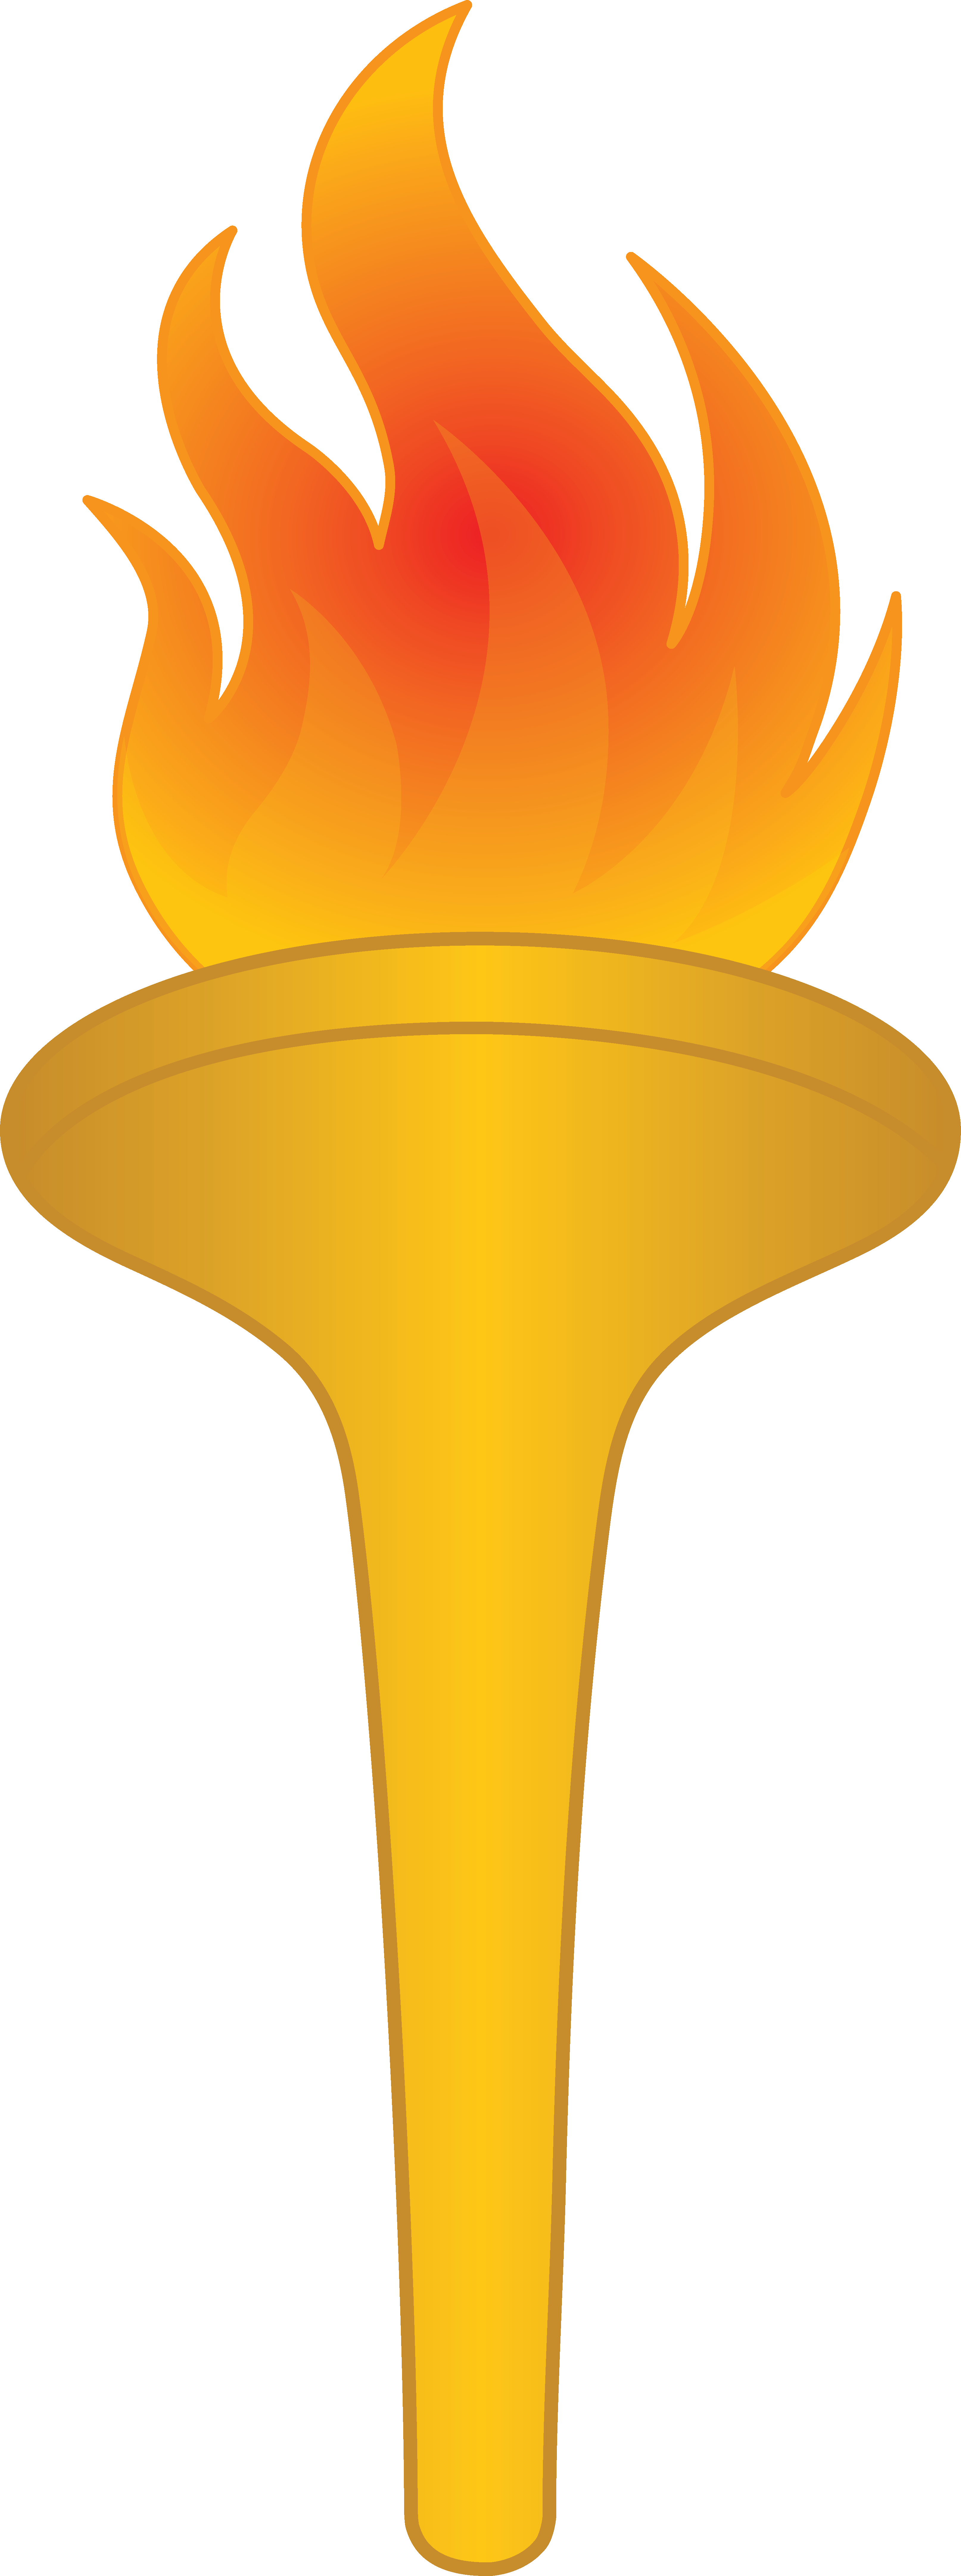 Olympics clipart torch handle. Flames olympic pencil and